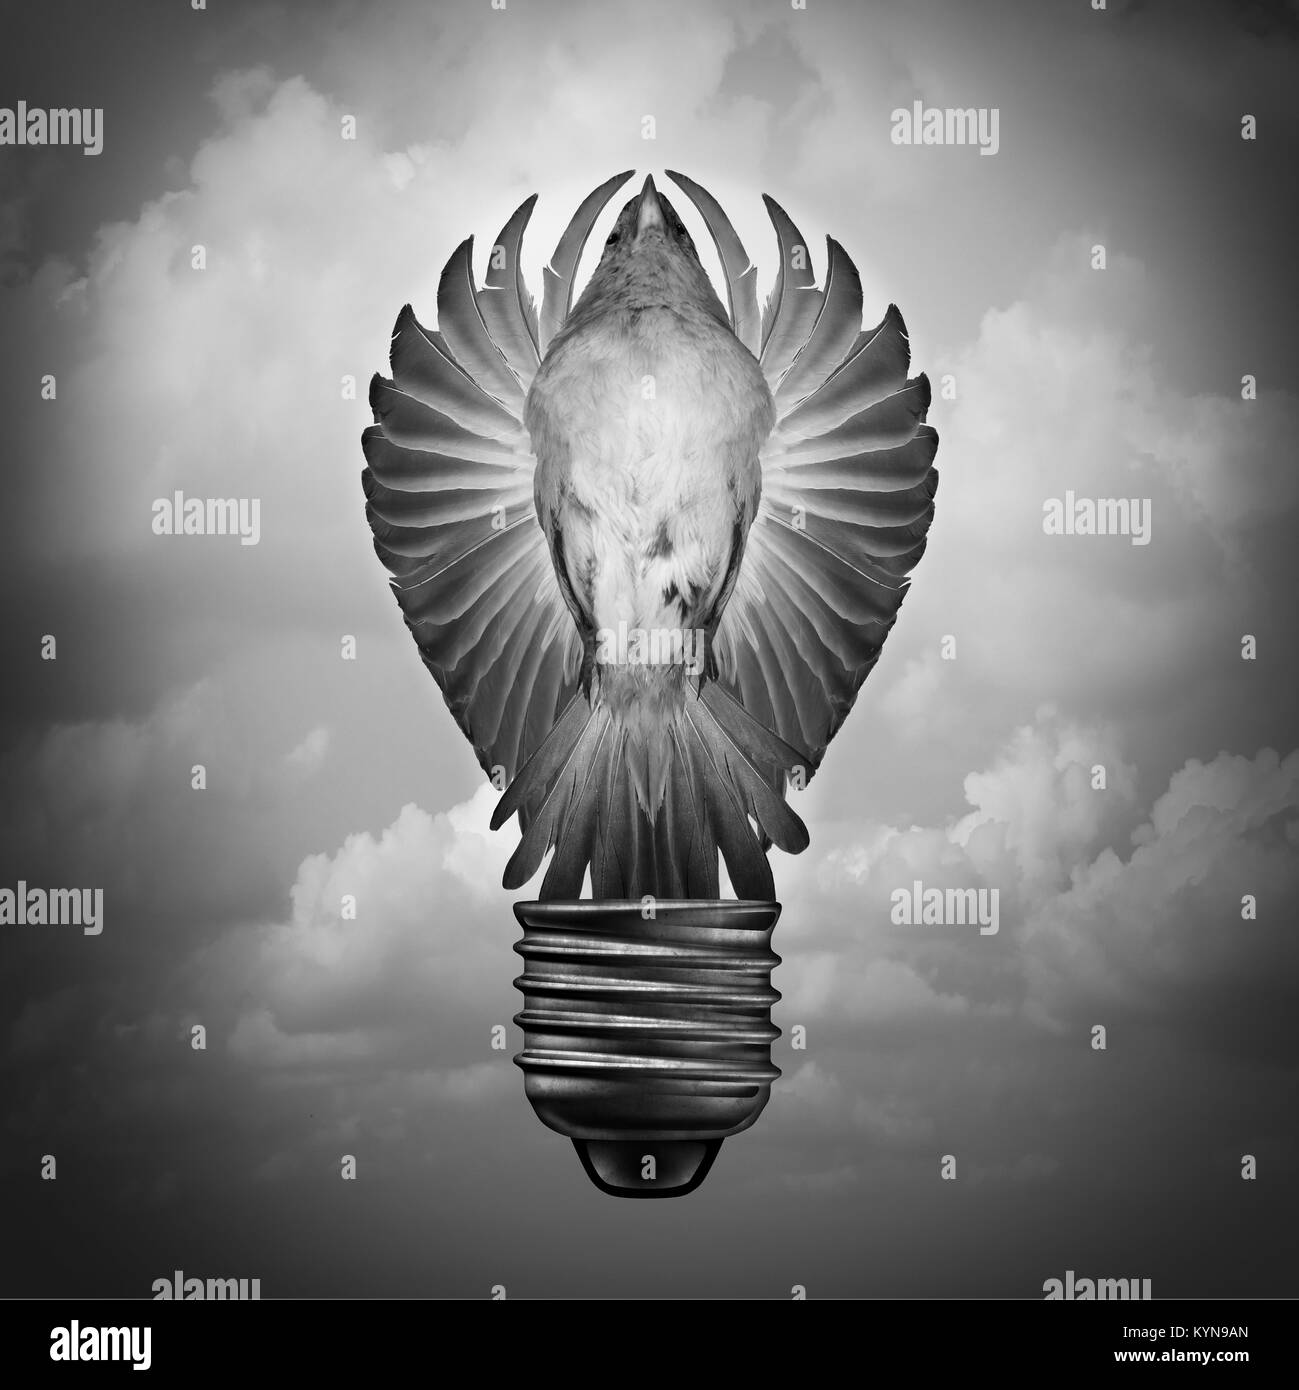 Creative concept as a surreal idea and innovation metaphor with a bird with open wings shaped as a light bulb with 3D illustration elements. Stock Photo